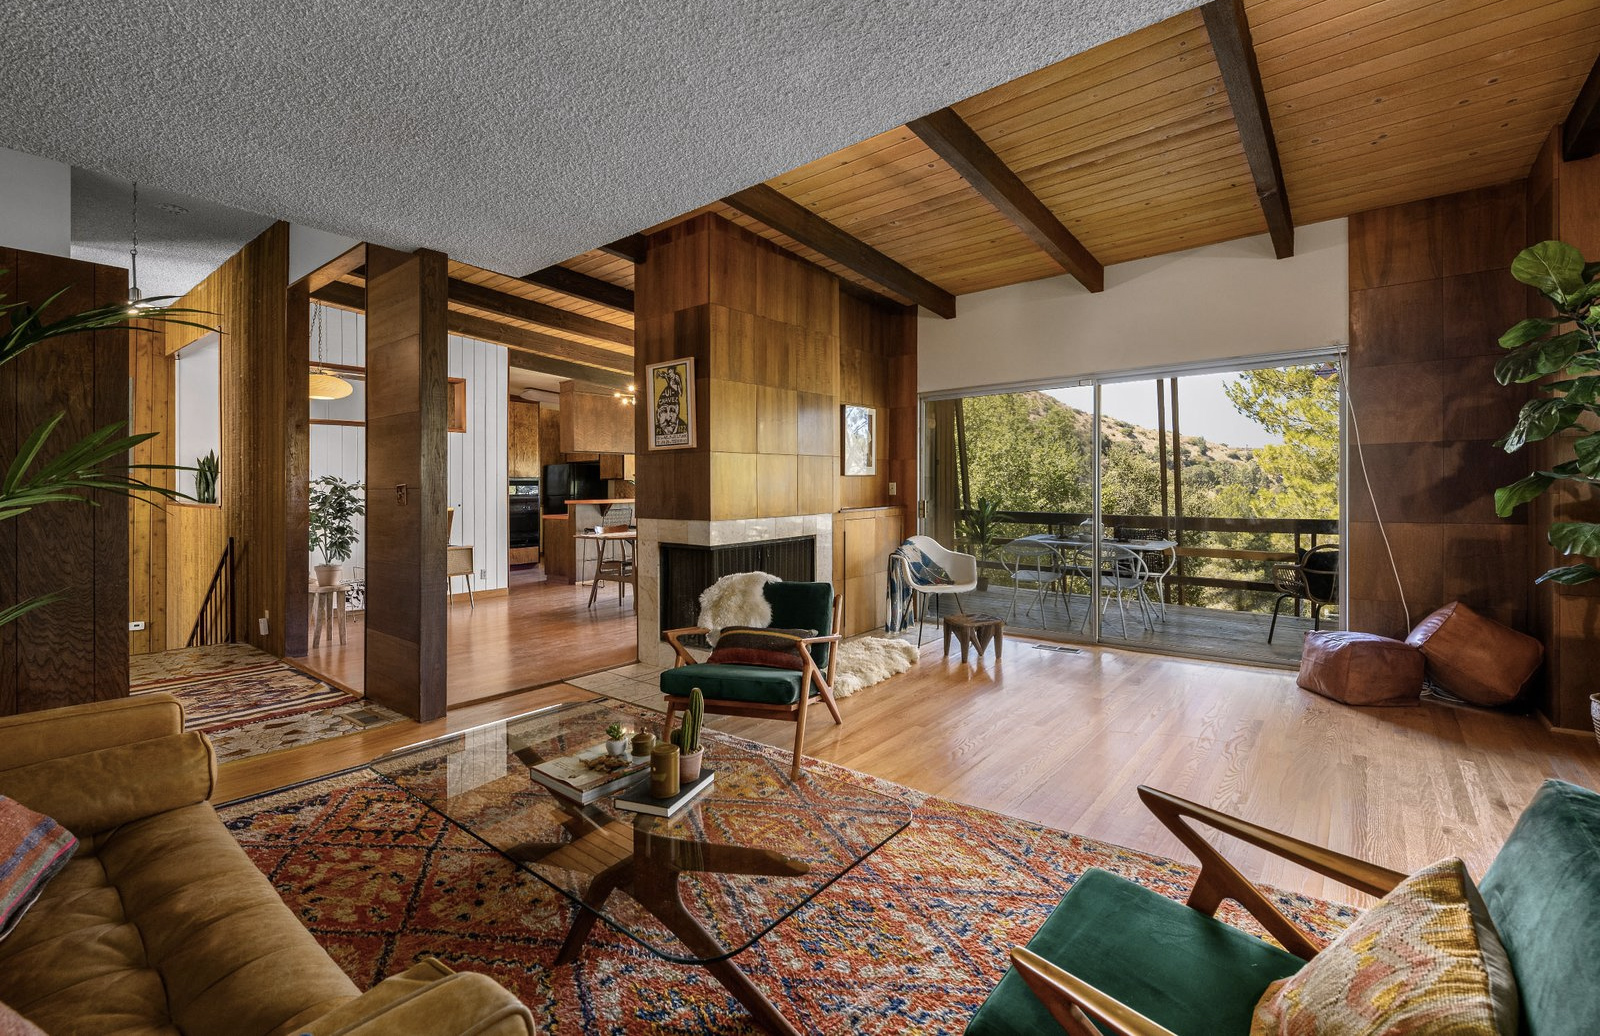 Gus Stamos' 1968 home in Glendale California is a timecapsule of midcentury modern design that has only been on the market twice